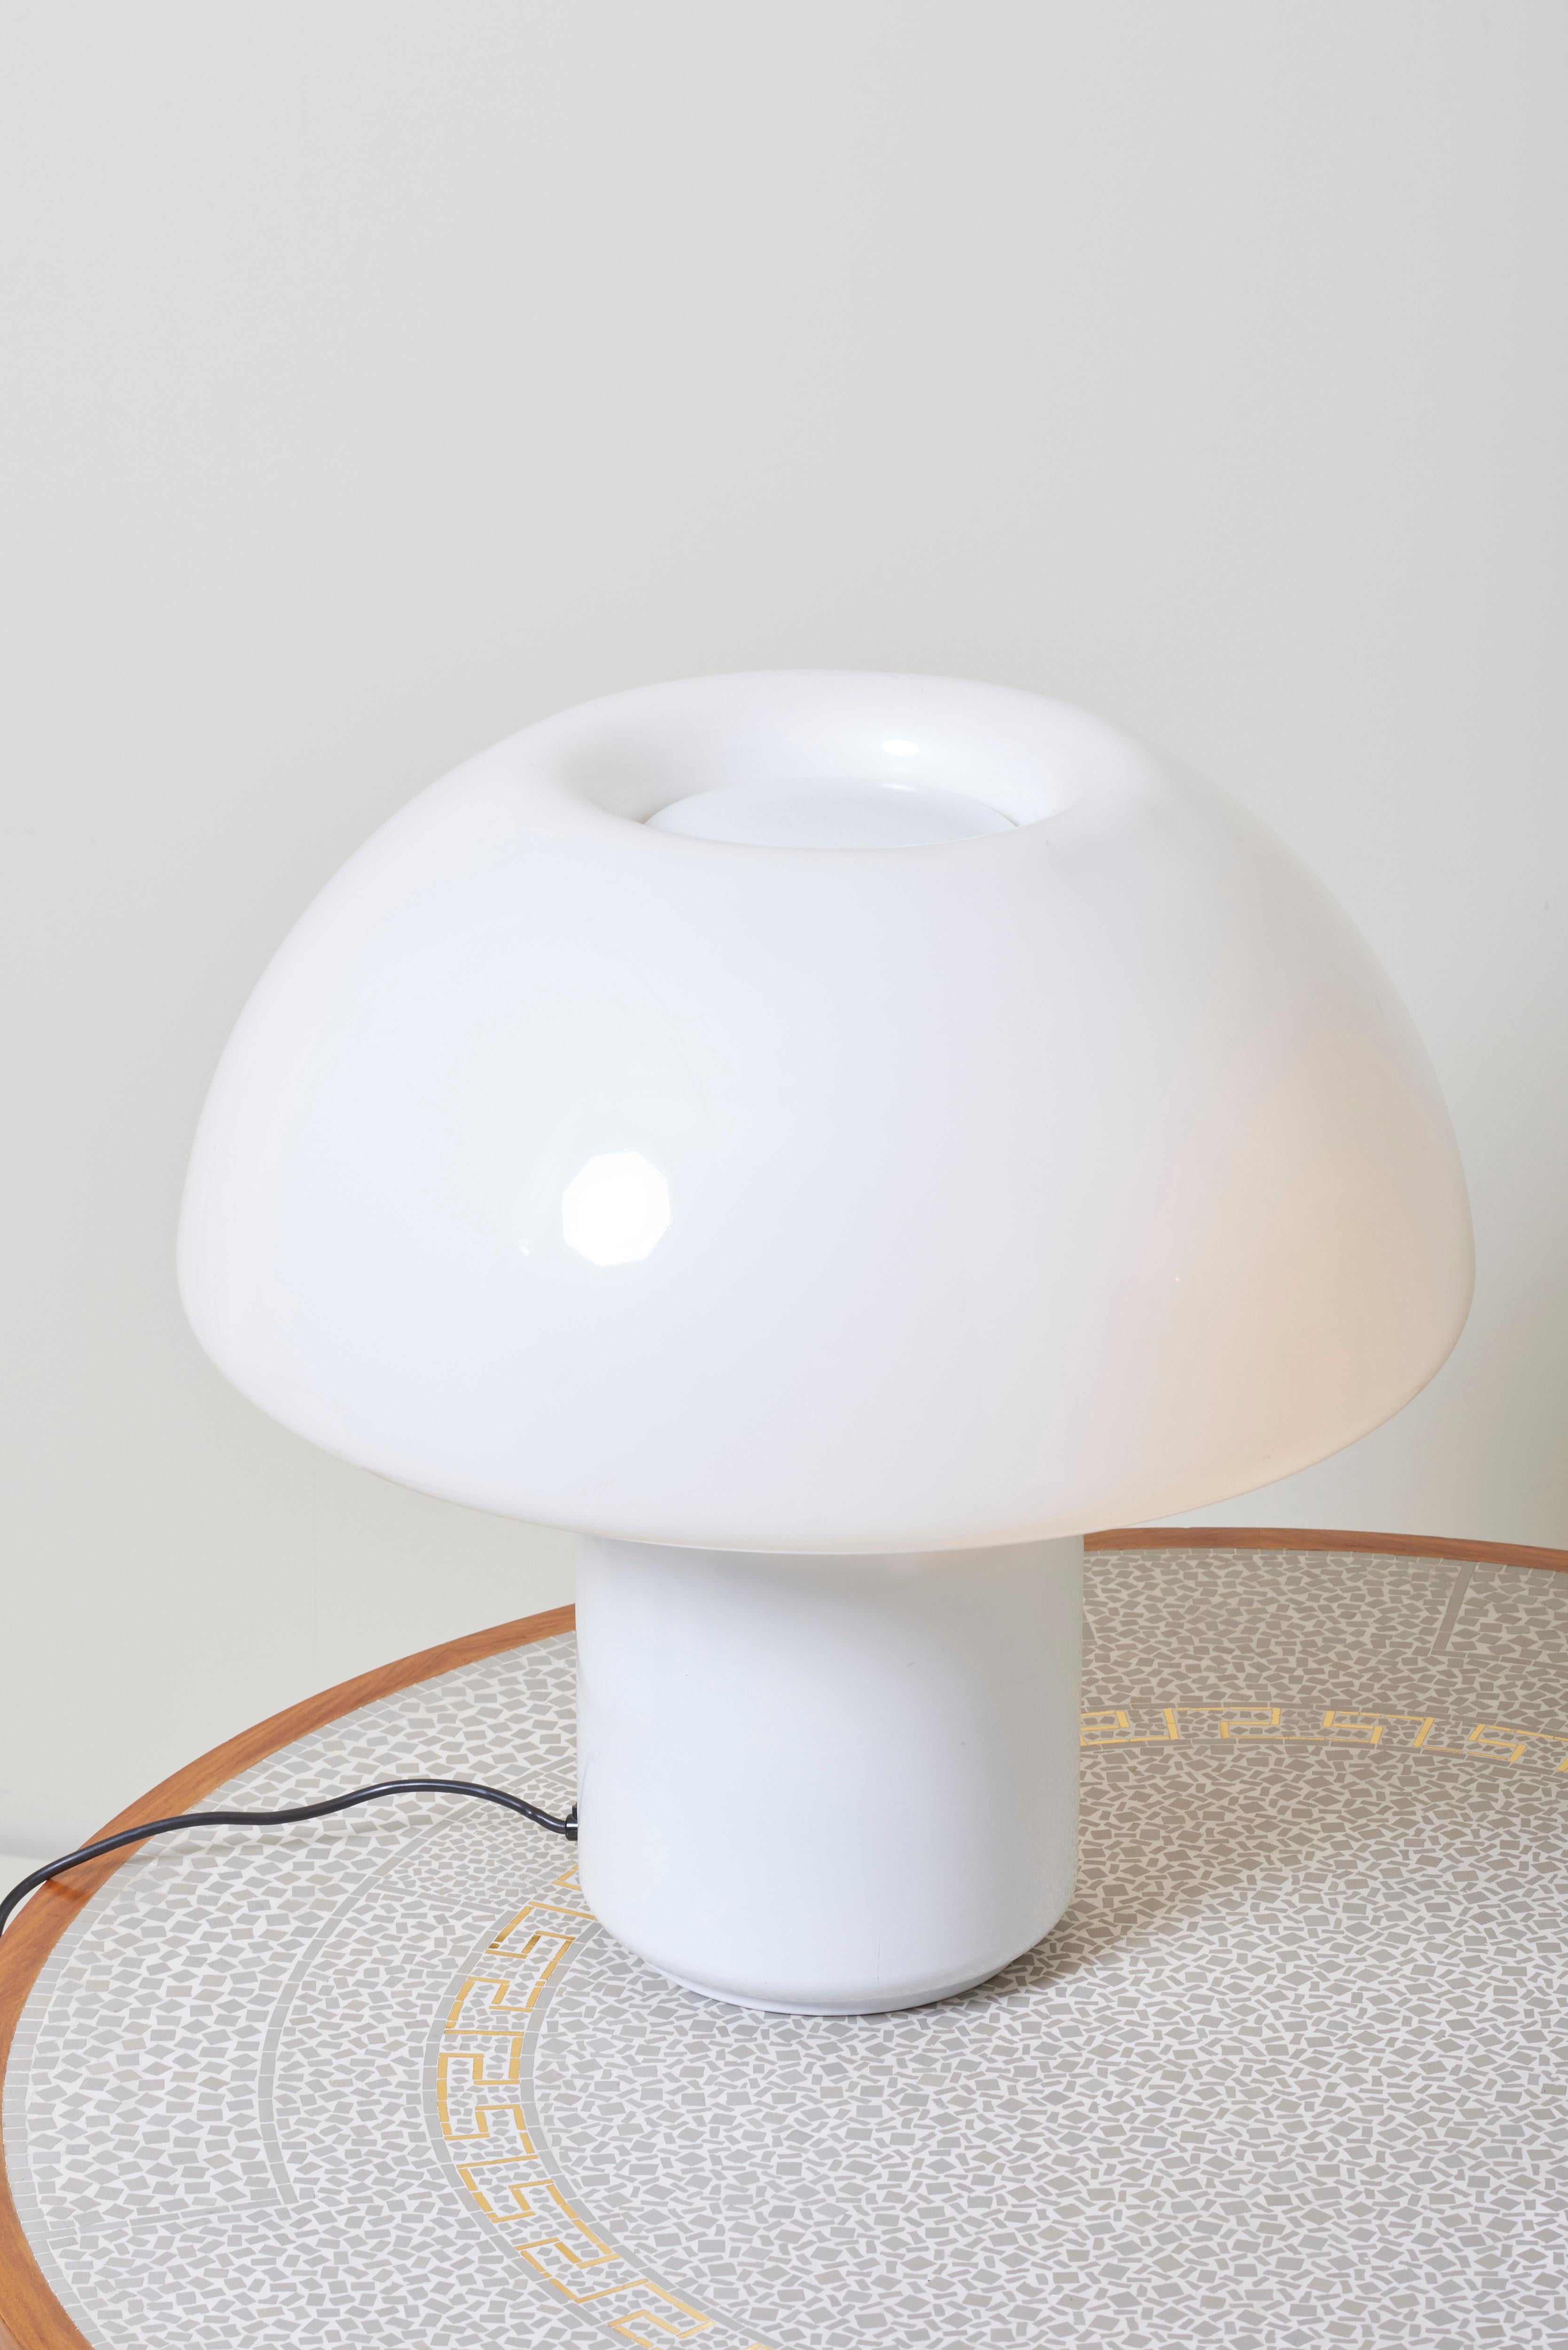 Late 20th Century Mushroom Table Lamp Mod. 625 by Elio Martinelli for Martinelli Luce, Italy